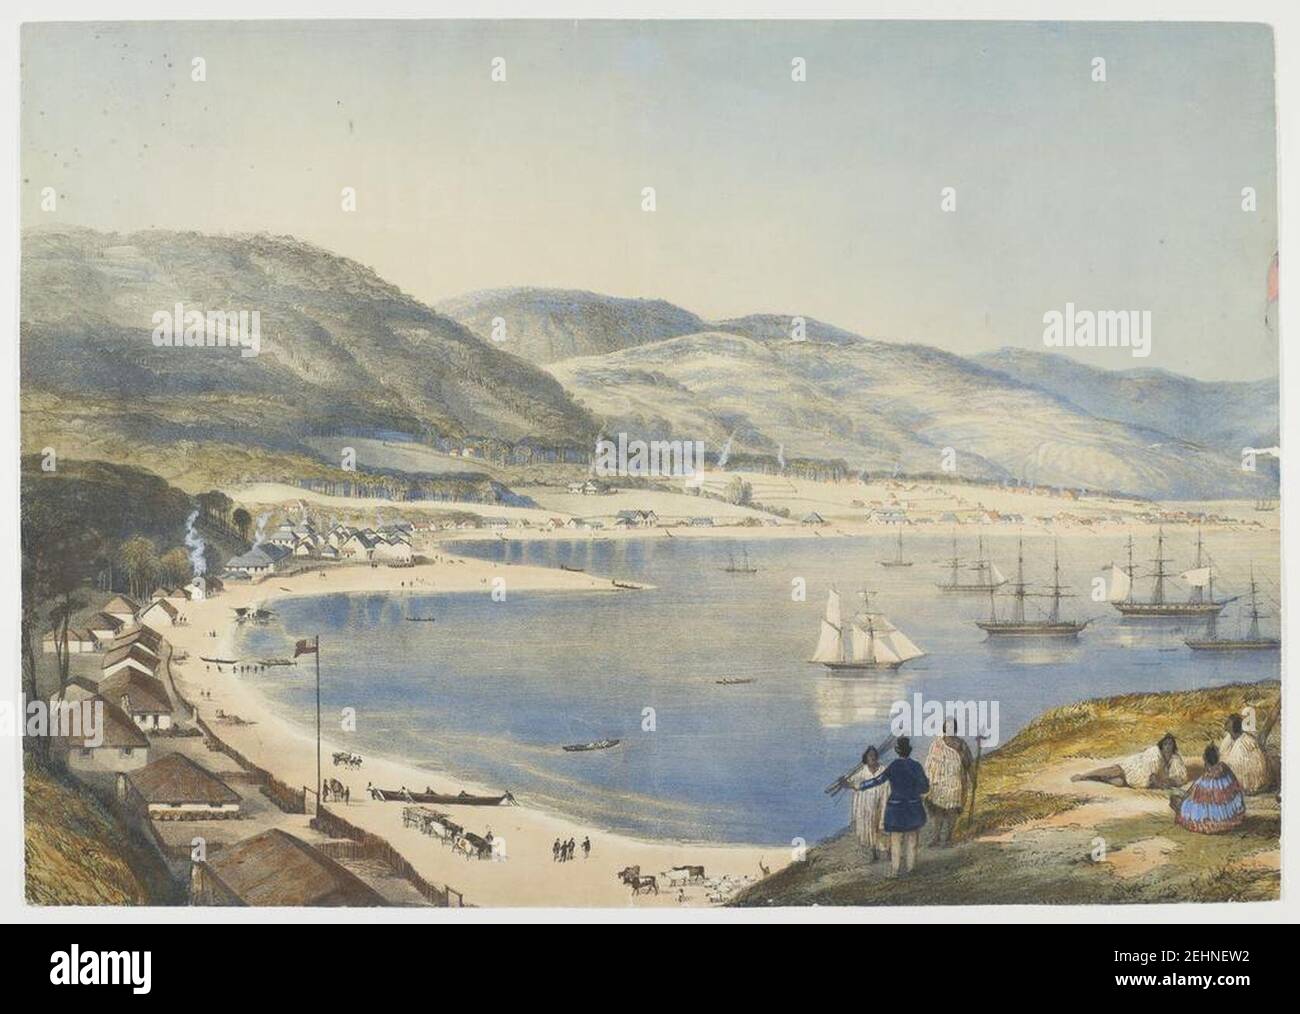 Part of Lambton Harbour, in Port Nicholson, New Zealand. Drawn in April, 1841, by Charles Heaphy. Lithography created by Thomas Allom and published in 1891. Stock Photo